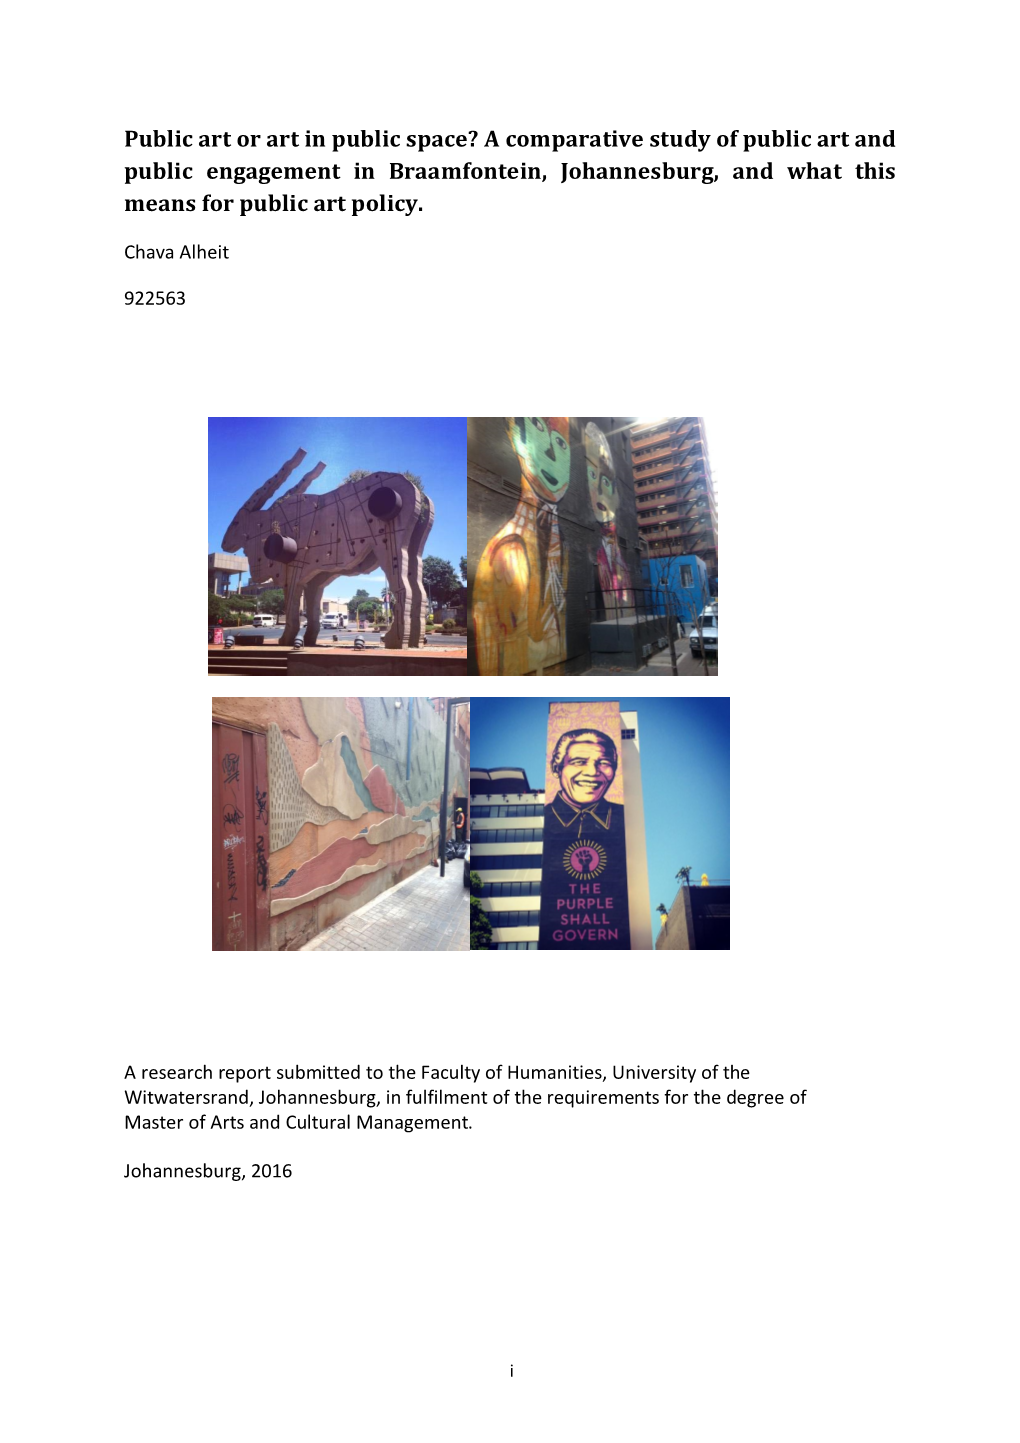 A Comparative Study of Public Art and Public Engagement in Braamfontein, Johannesburg, and What This Means for Public Art Policy